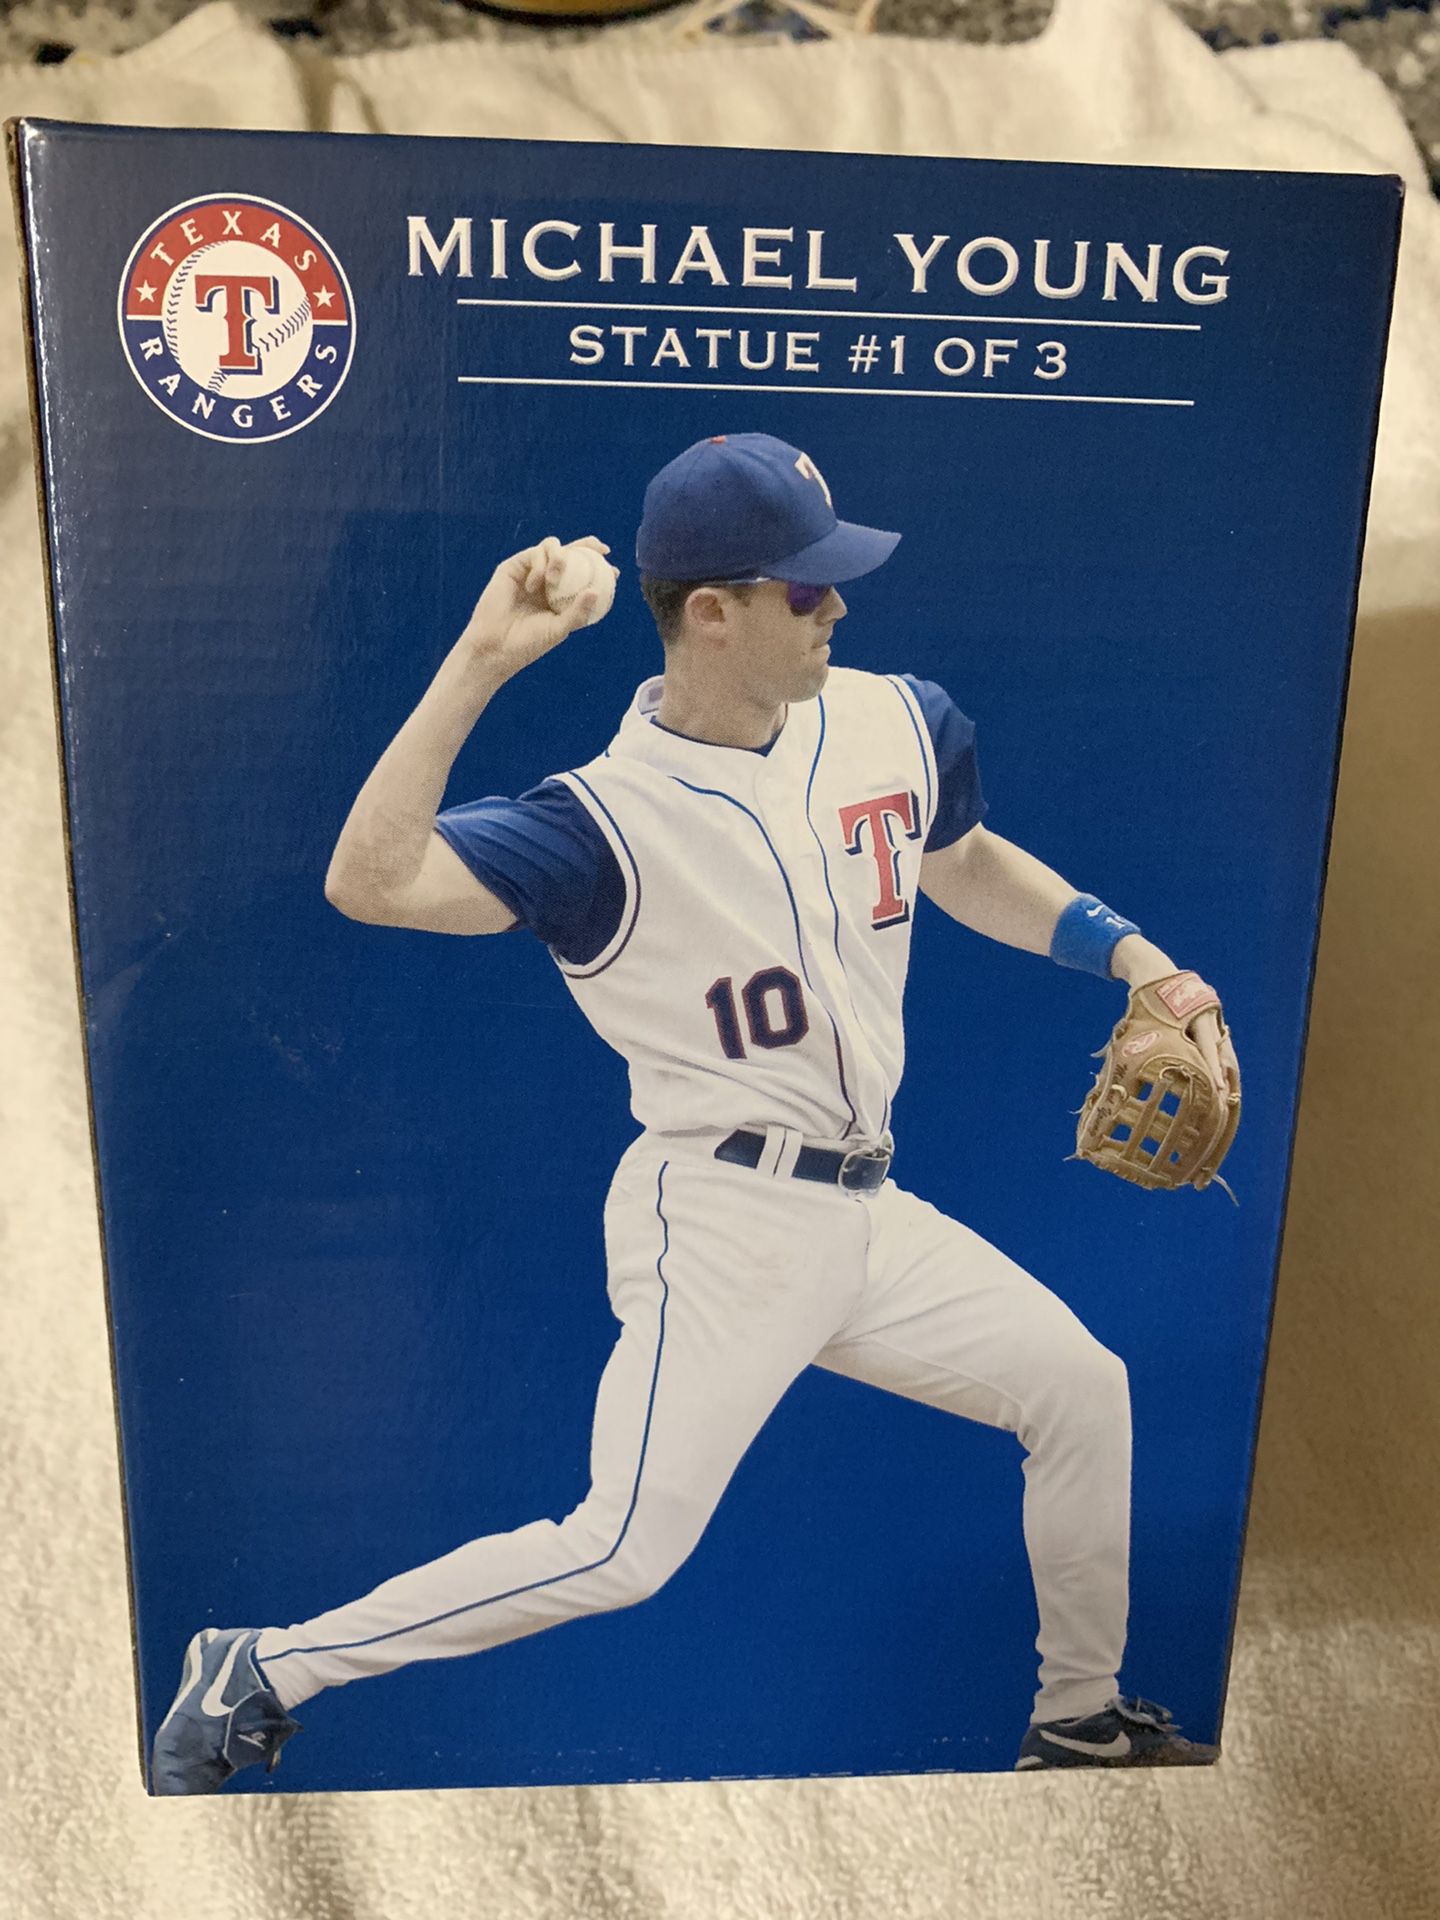 MICHAEL YOUNG STATUE 2005 MINT IN BOX & 2005 DONRUSS DIAMOND KINGS RELIC  BAT CARD # 33/200 for Sale in Mansfield, TX - OfferUp